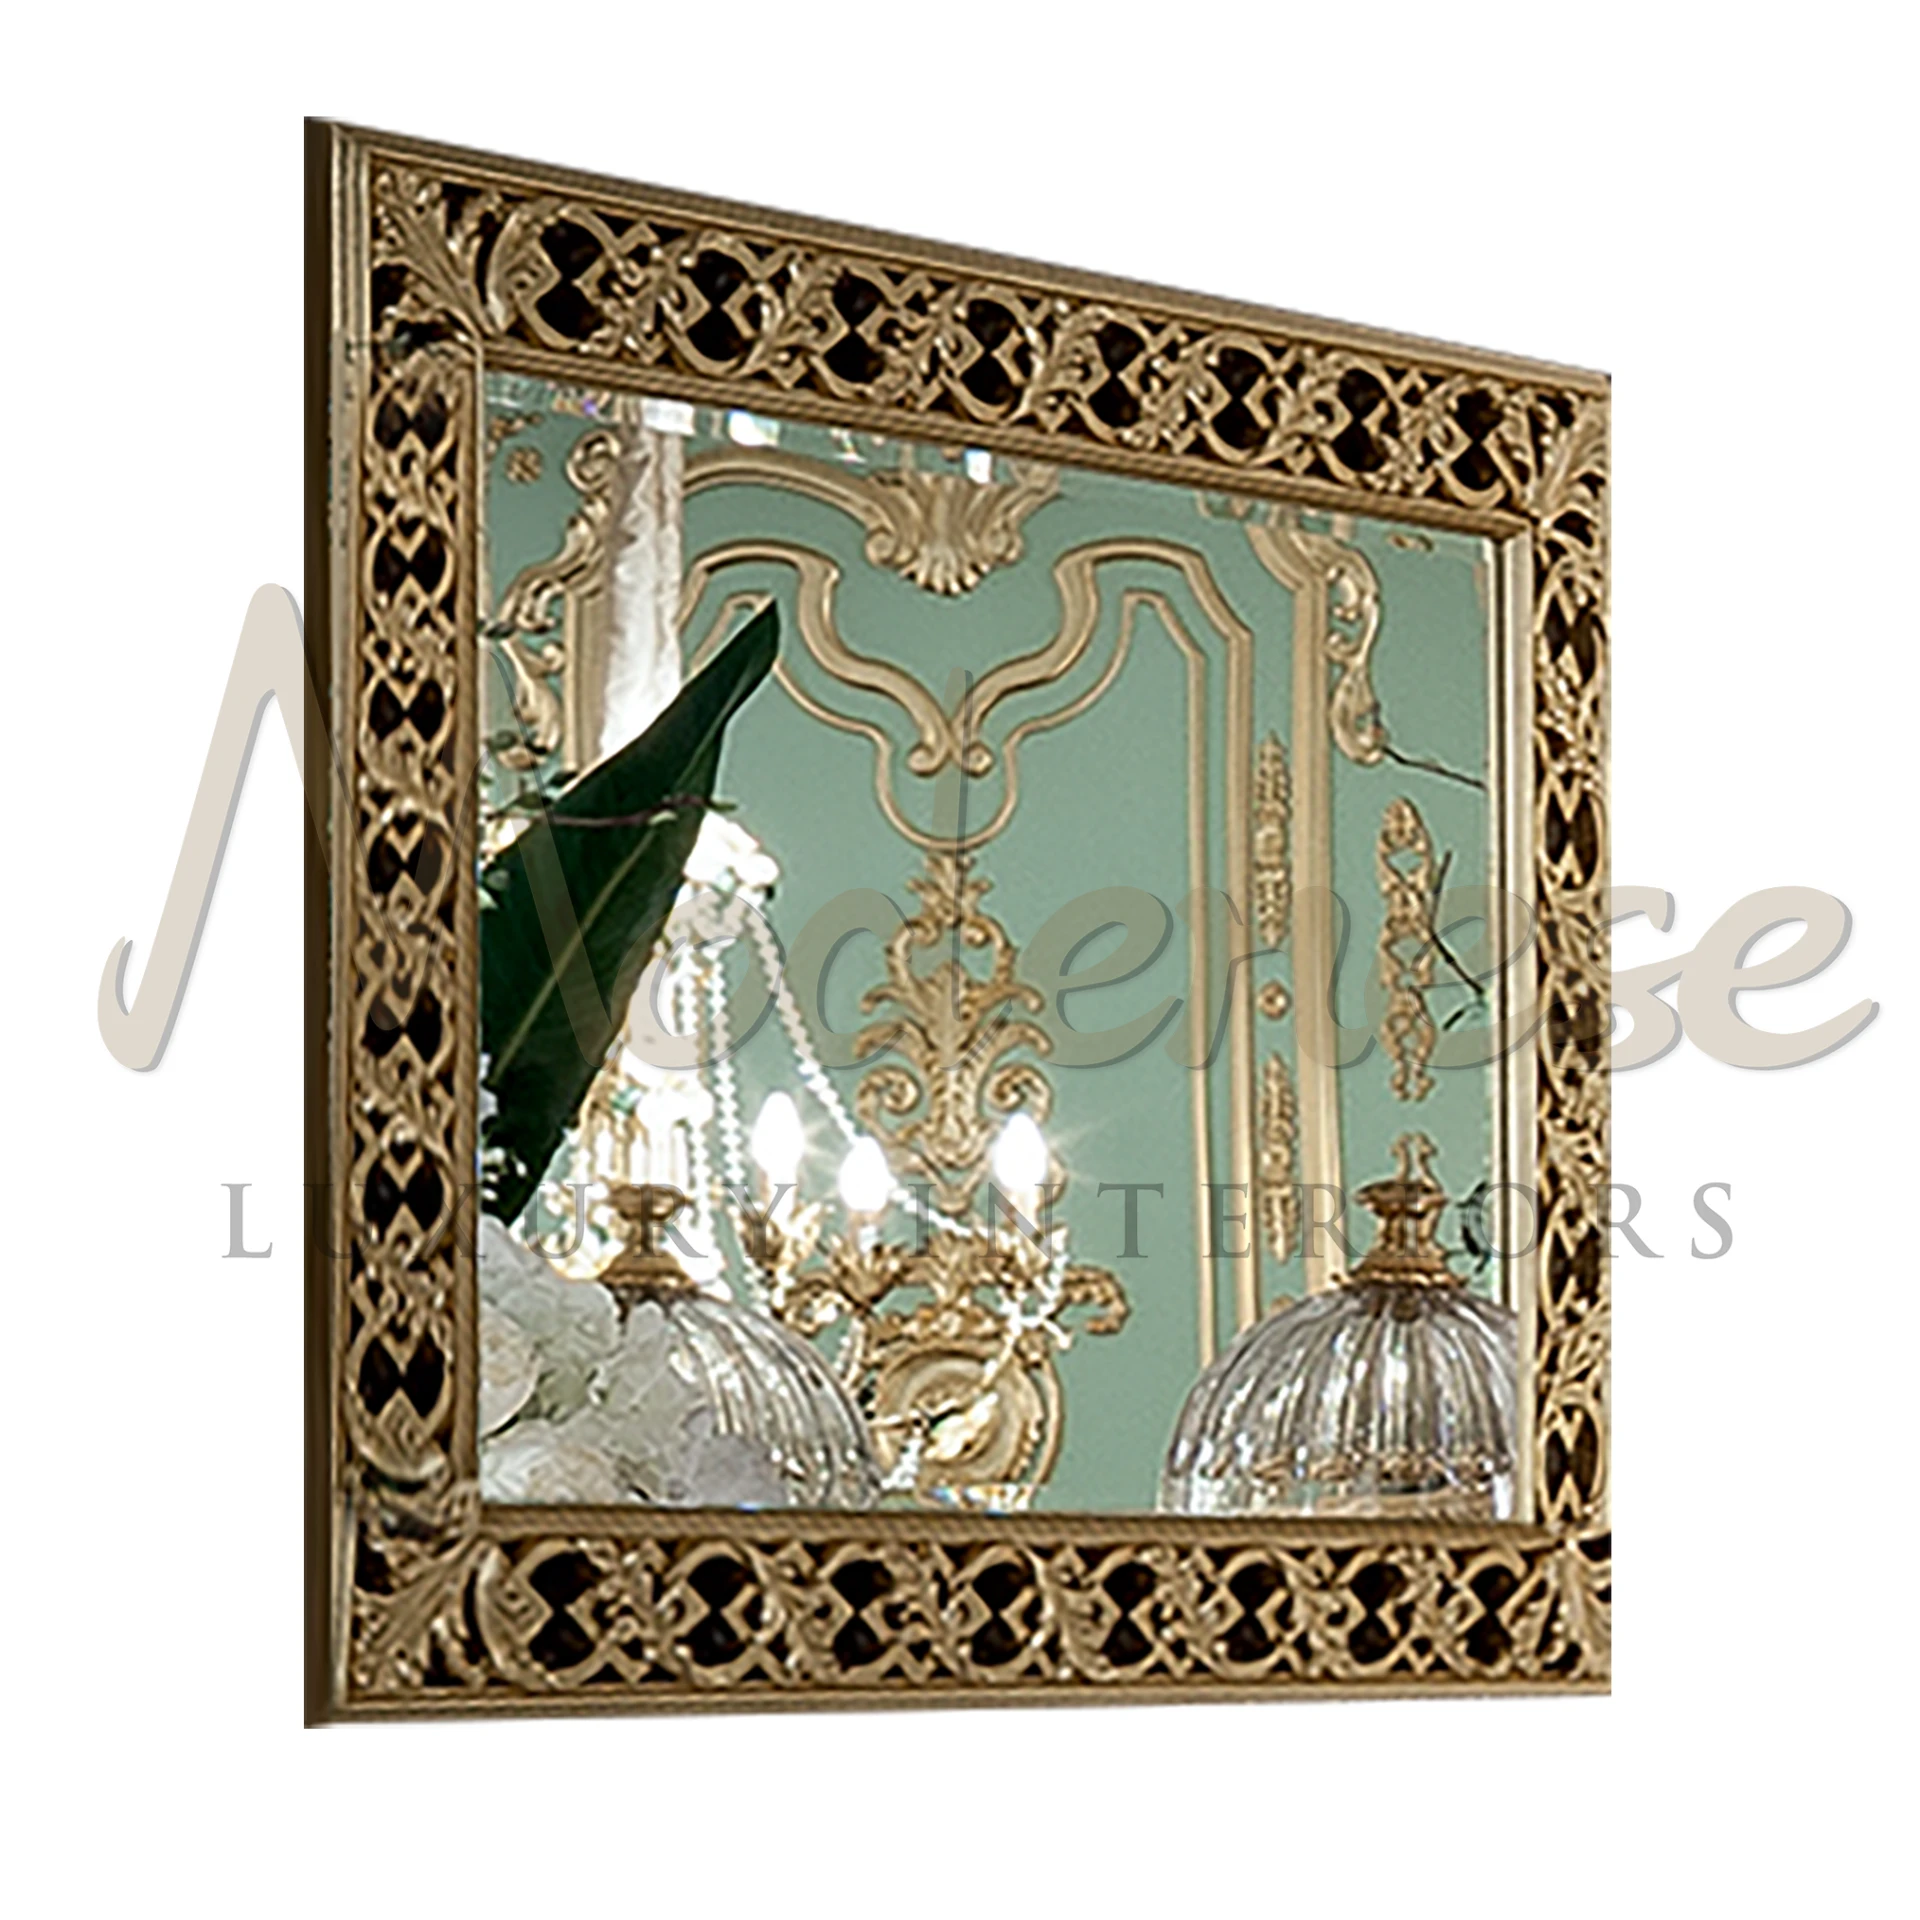 Baroque Style Rectangular Mirror with elaborate scrollwork and floral motifs, embodying classic luxury in home decor.